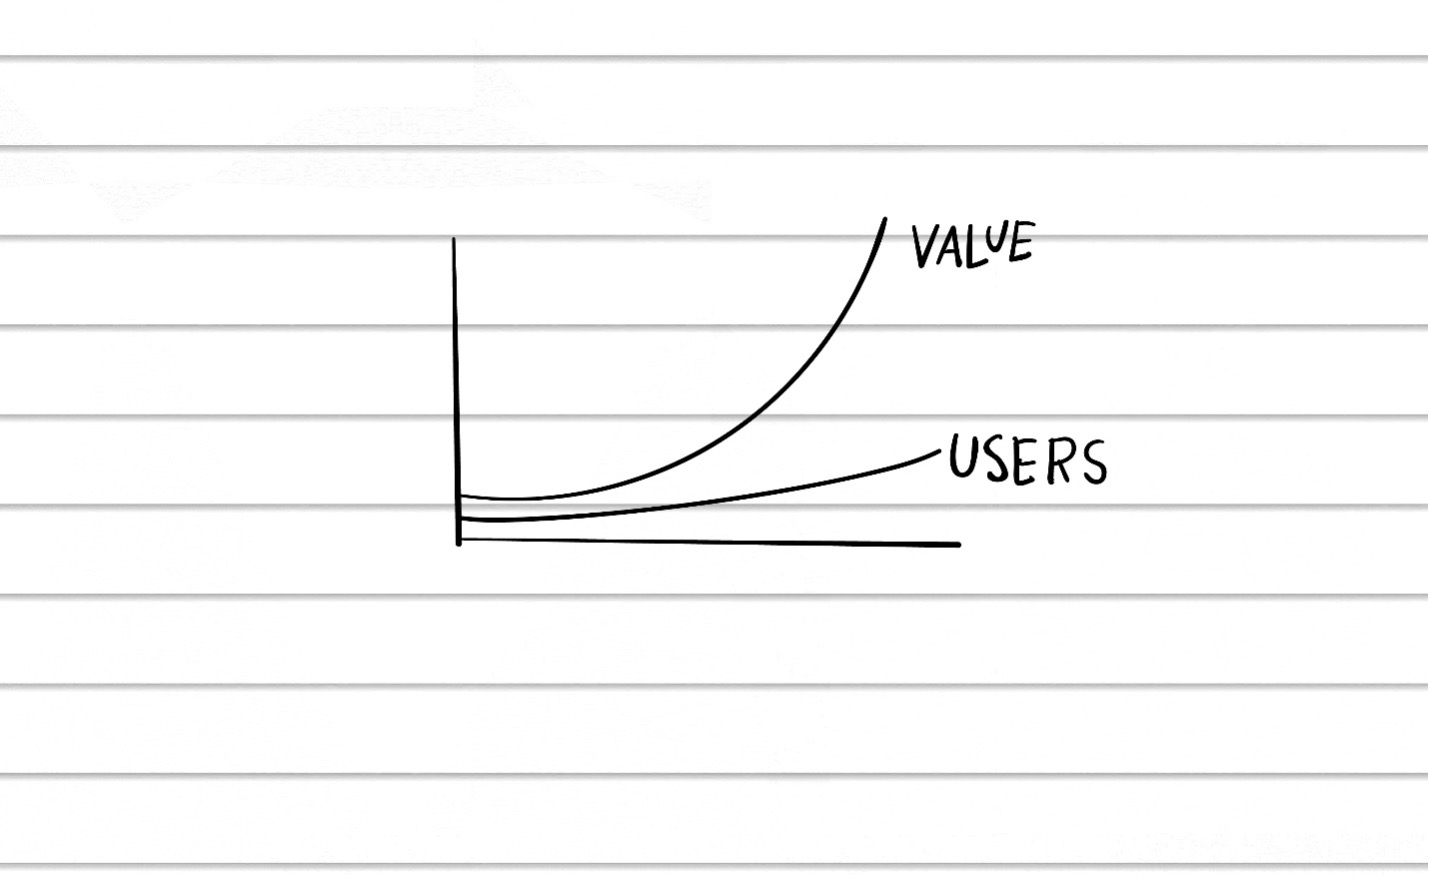 value - users